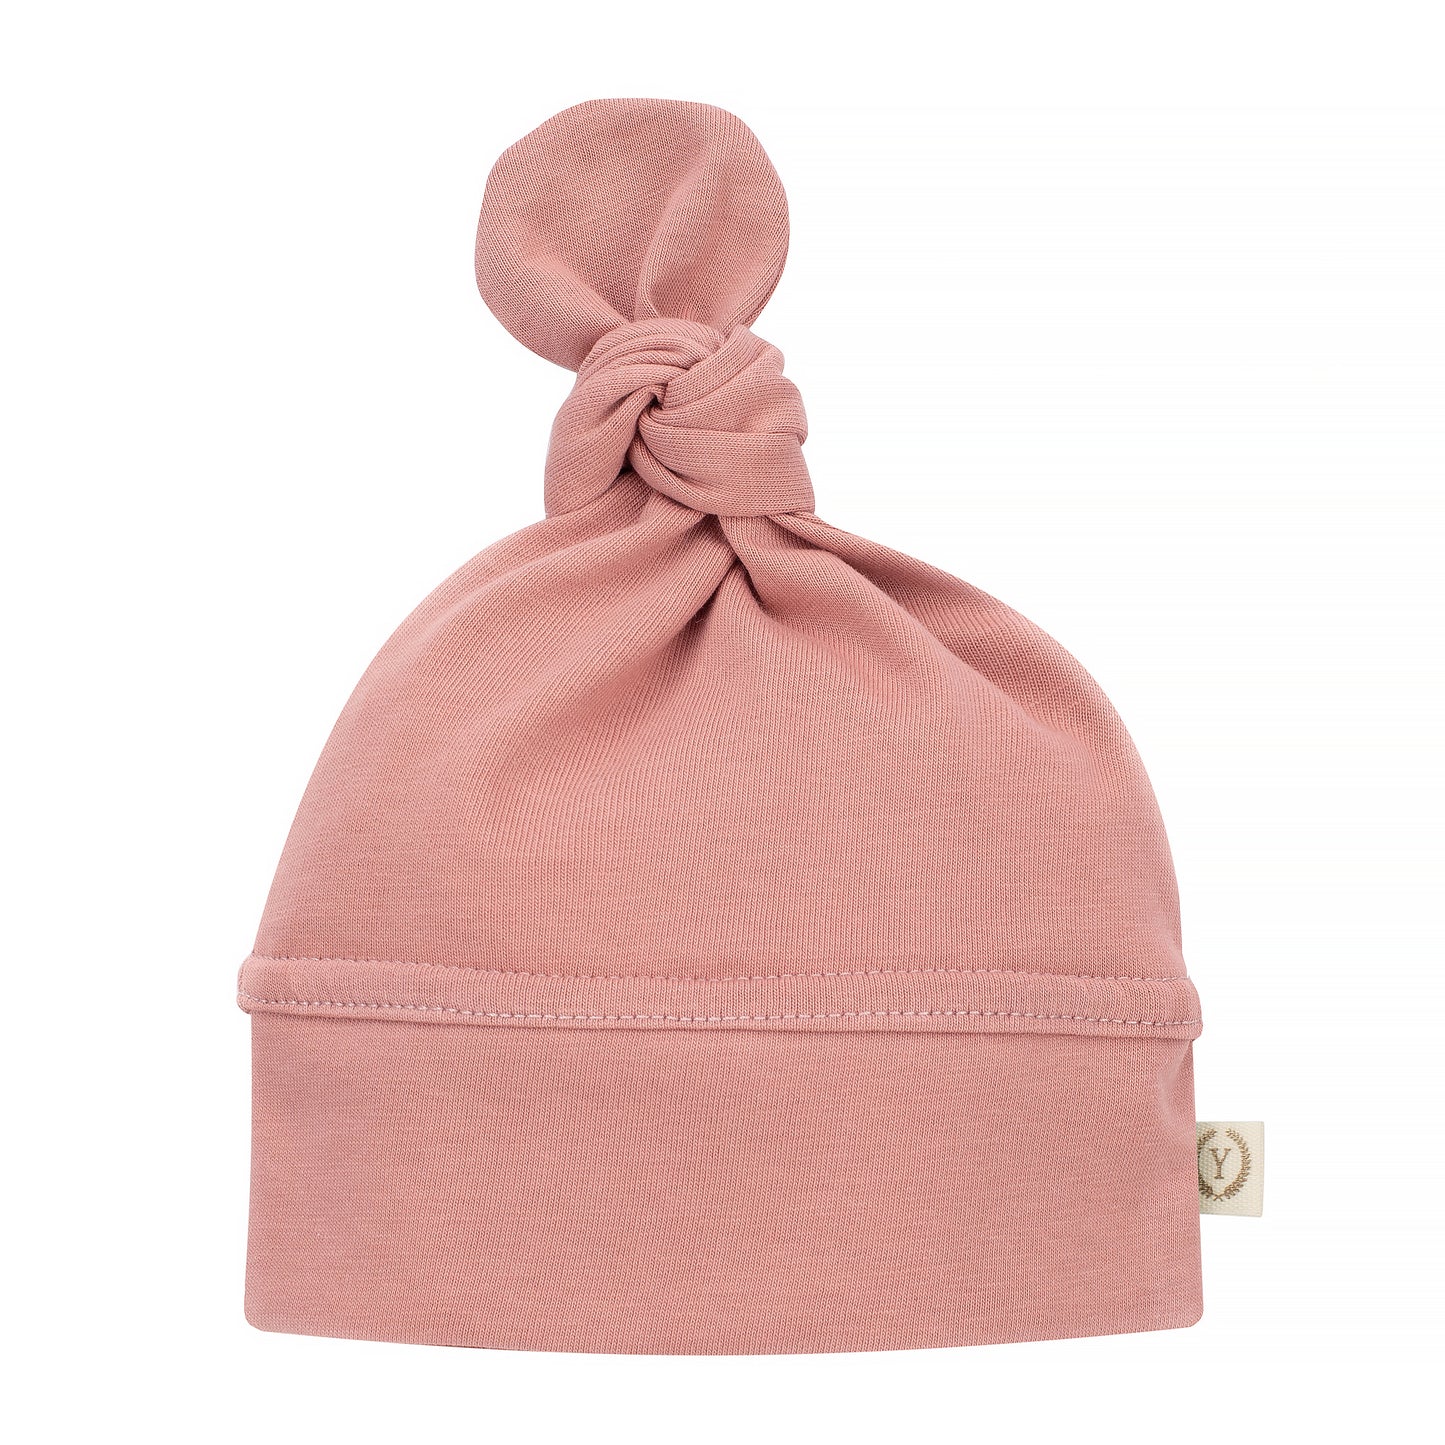 Top Knot Baby Hat ROSE GOLD